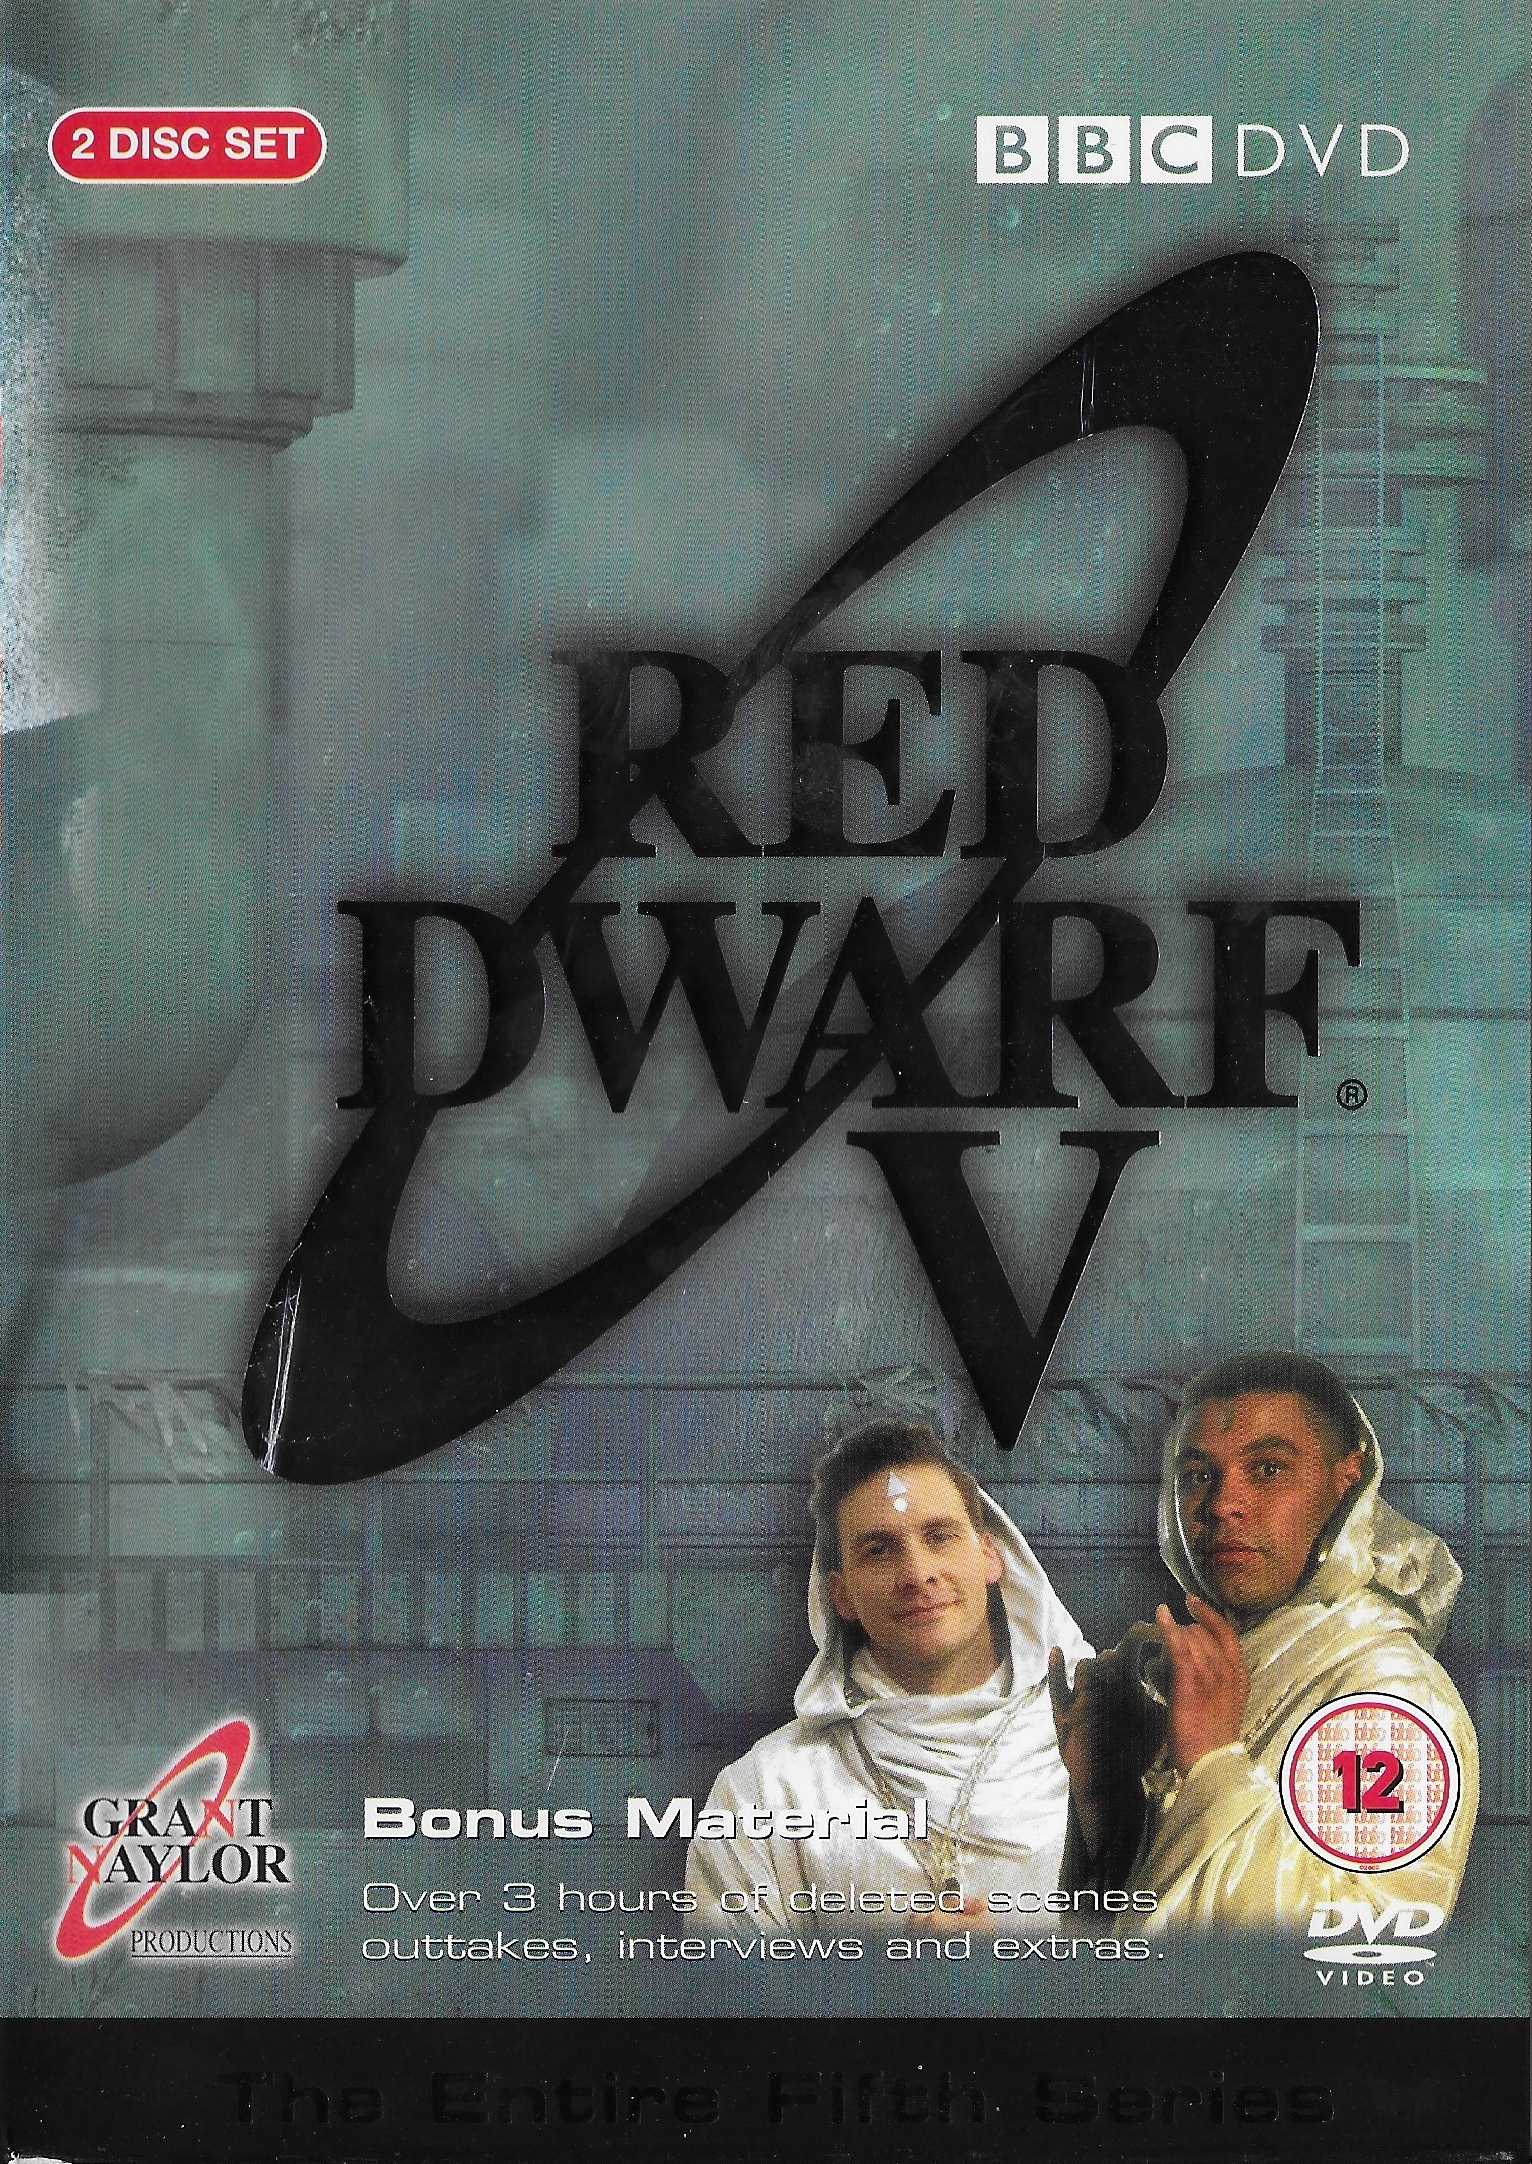 Picture of BBCDVD 1592 Red dwarf - Series V - Special edition gift set by artist Rob Grant / Doug Naylor from the BBC dvds - Records and Tapes library